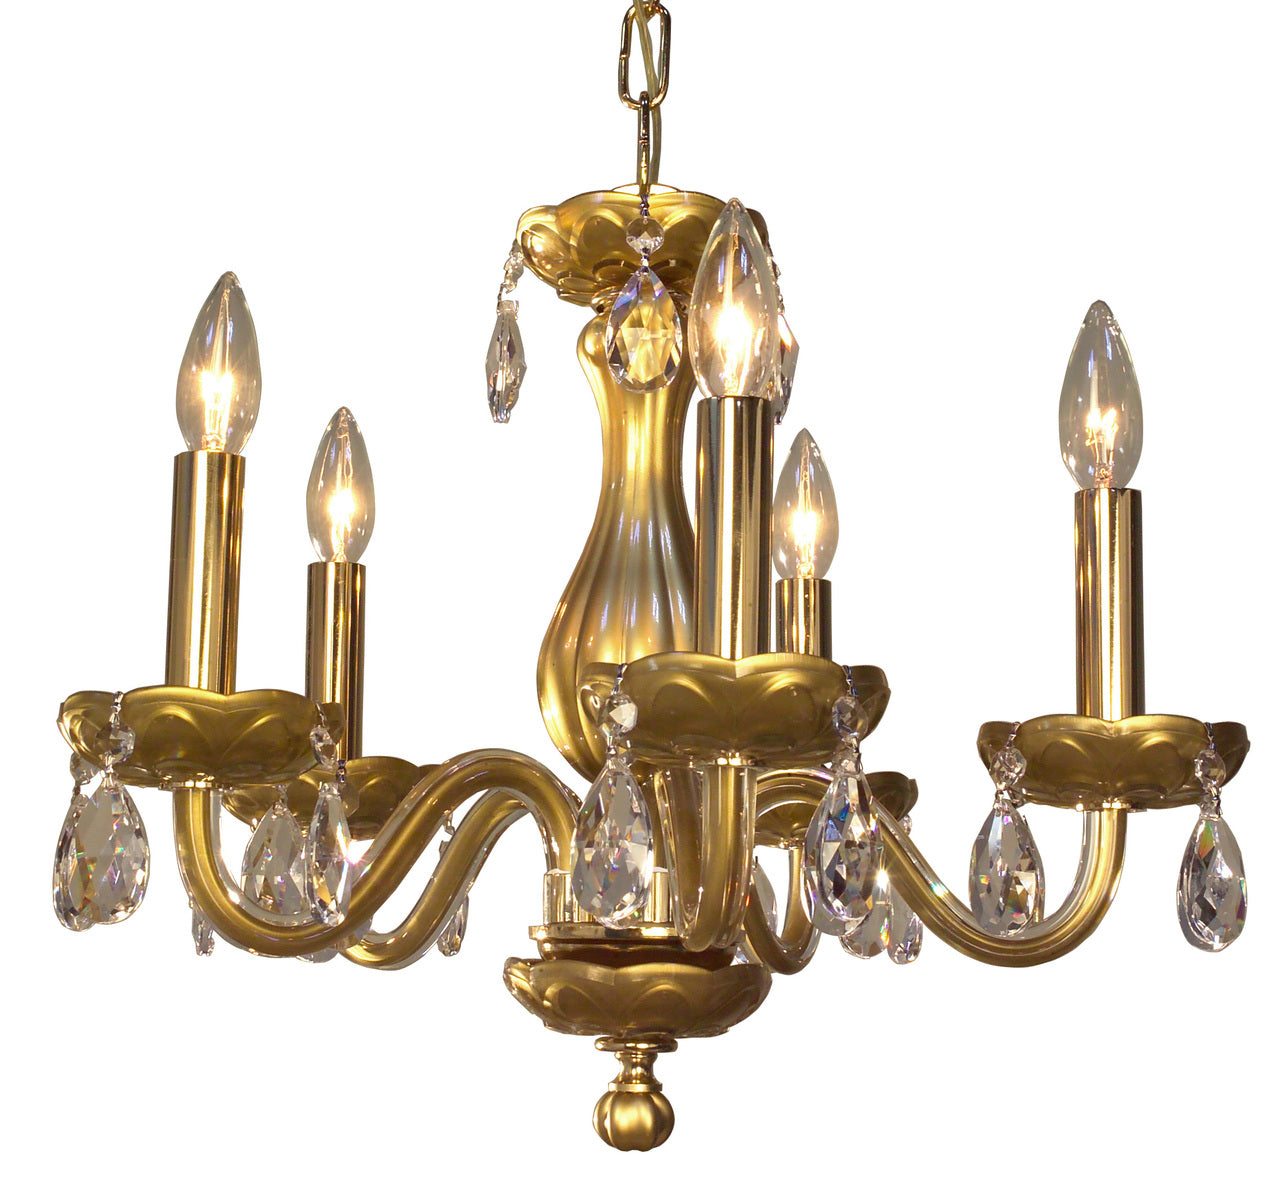 Classic Lighting 82045 GLD CPFR Monaco Crystal Chandelier in Gold (Imported from Spain)